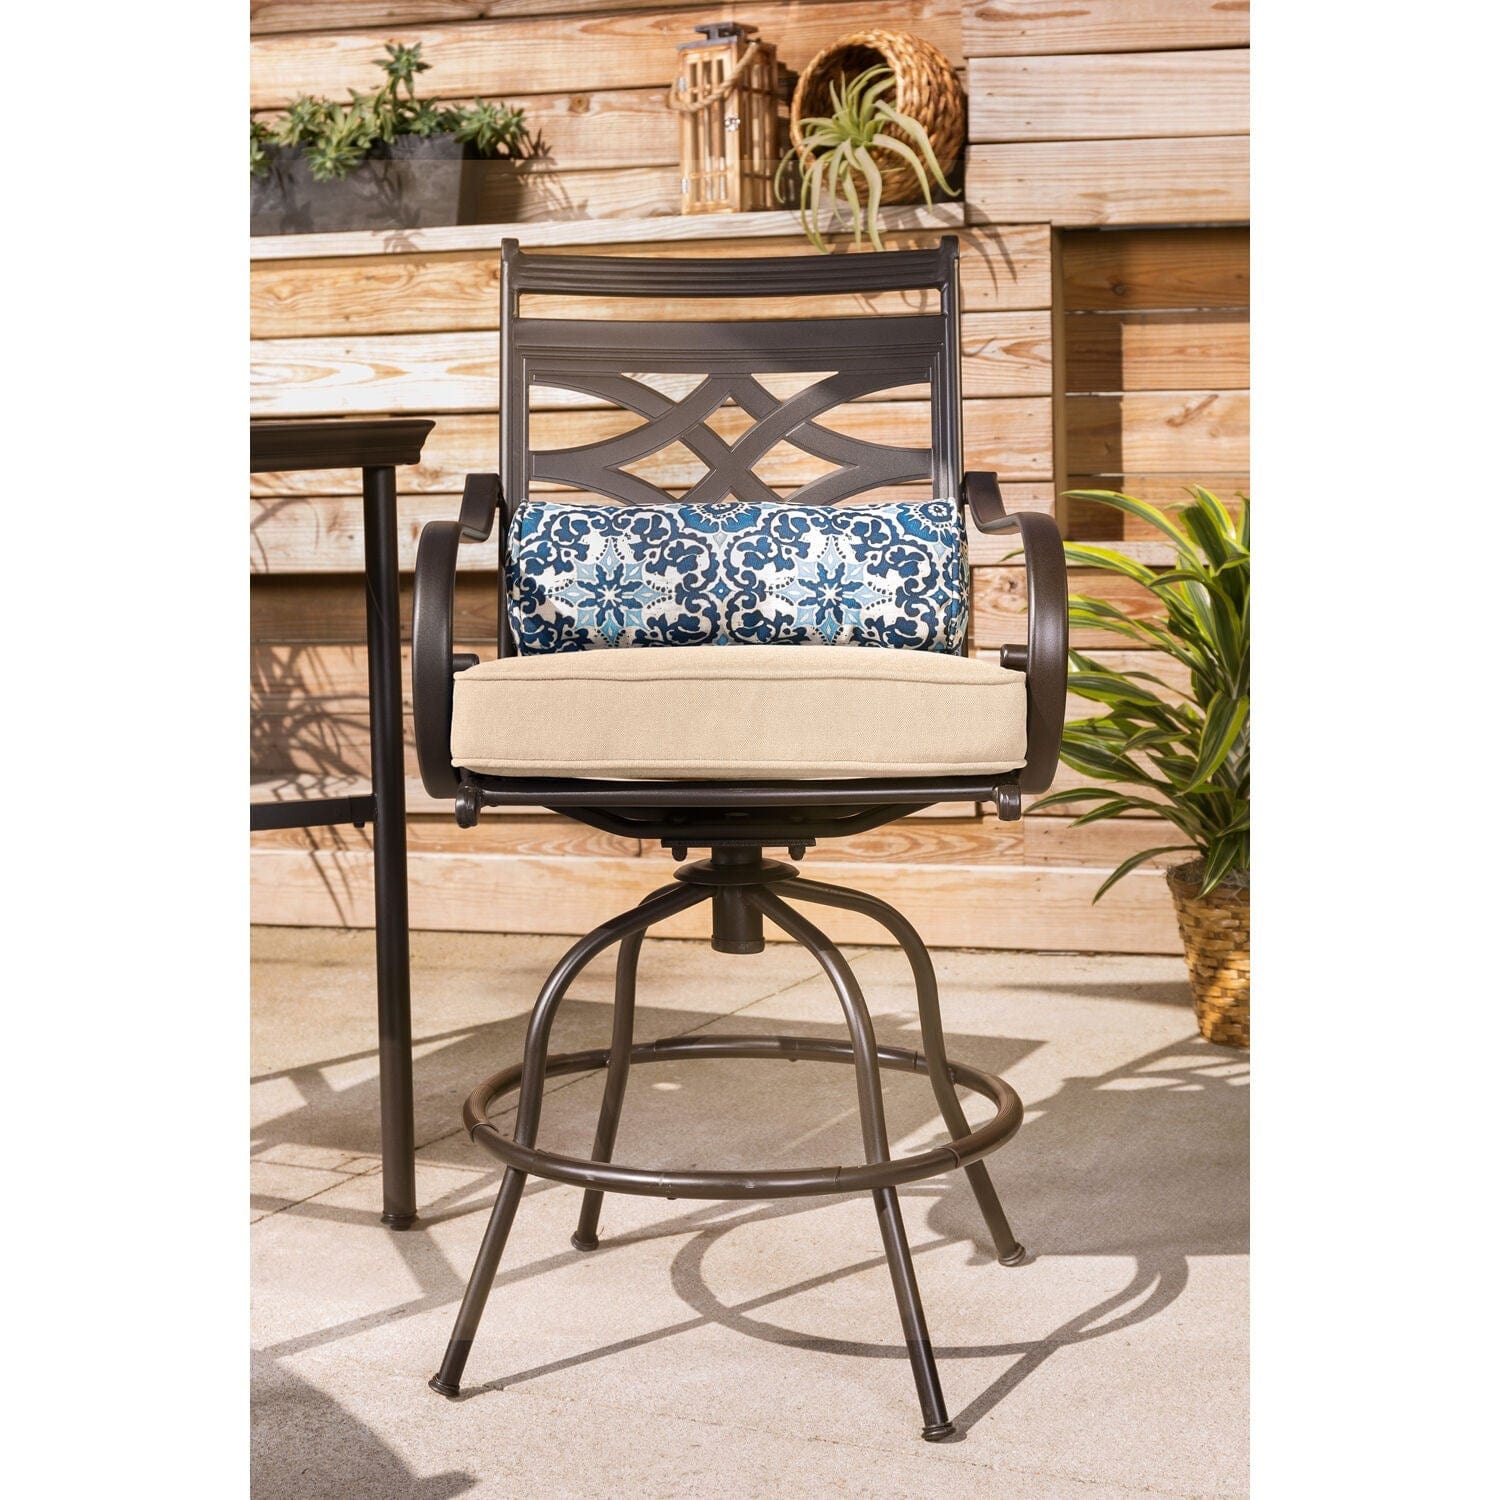 Hanover Outdoor Dining Set Hanover Montclair 3-Piece High-Dining Set in Country Cork with 2 Swivel Chairs and a 33-Inch Square Table | MCLRDN3PCBRSW2-TAN